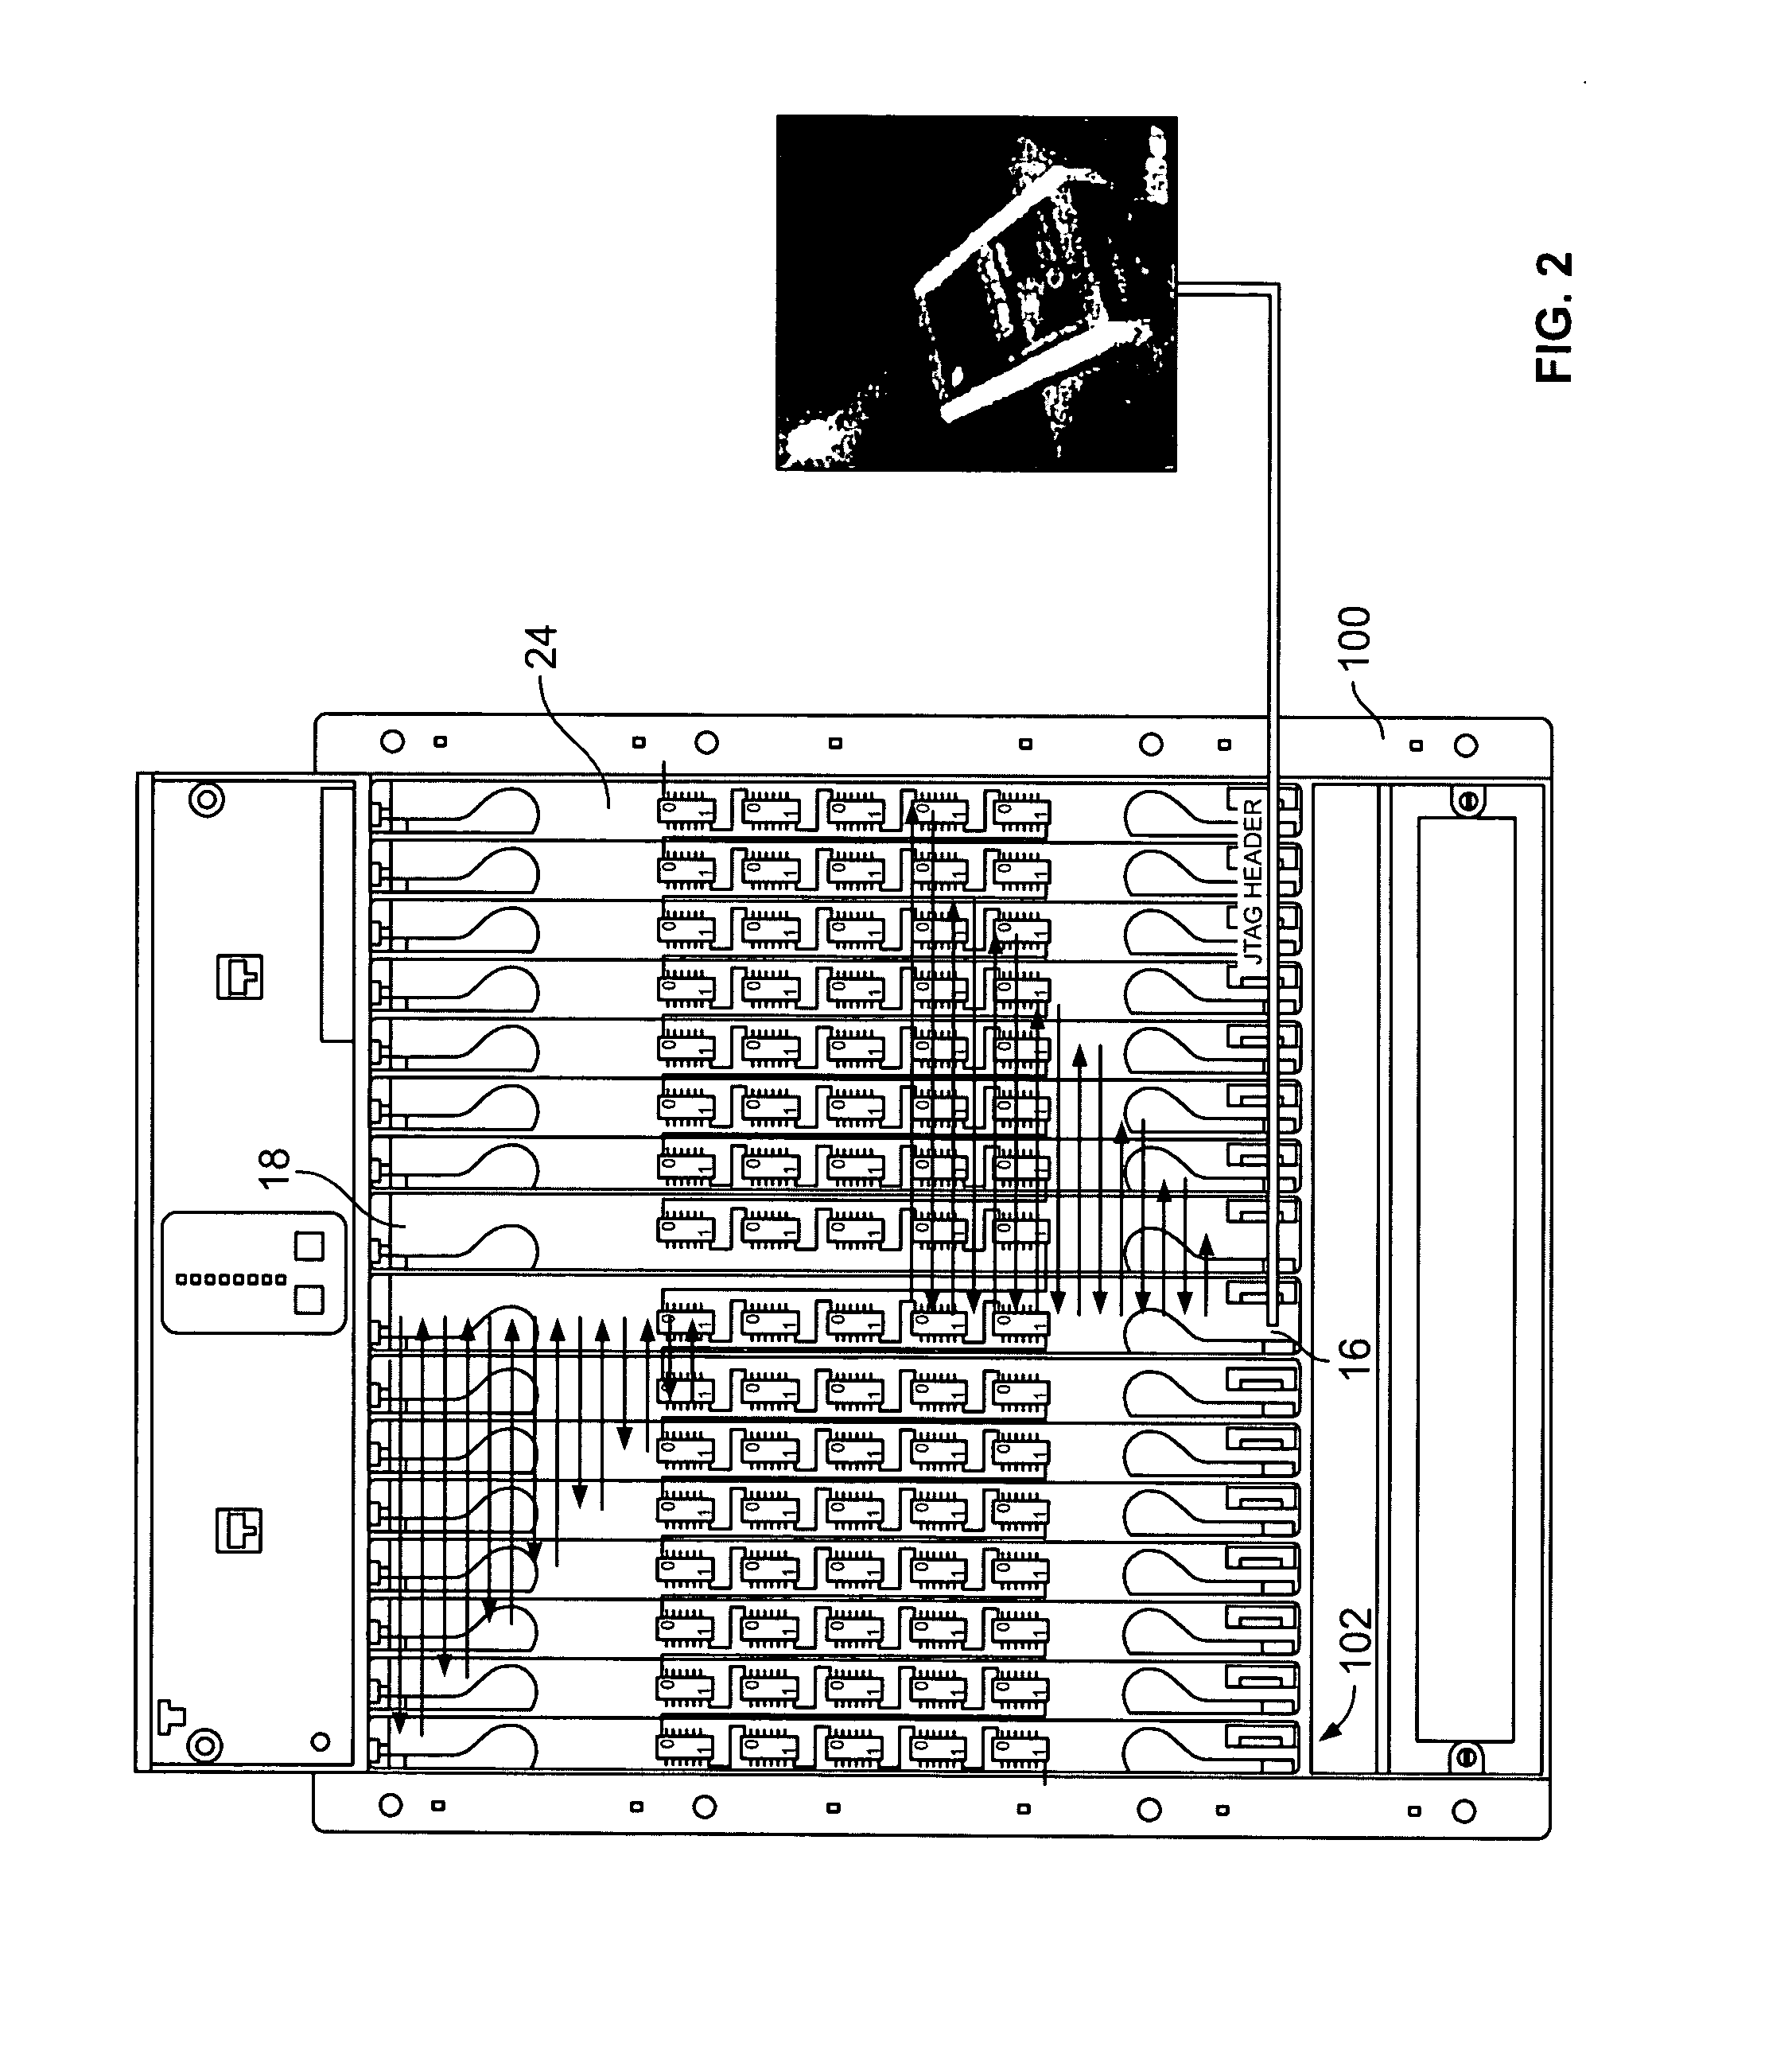 Method and system for testing backplanes utilizing a boundary scan protocol